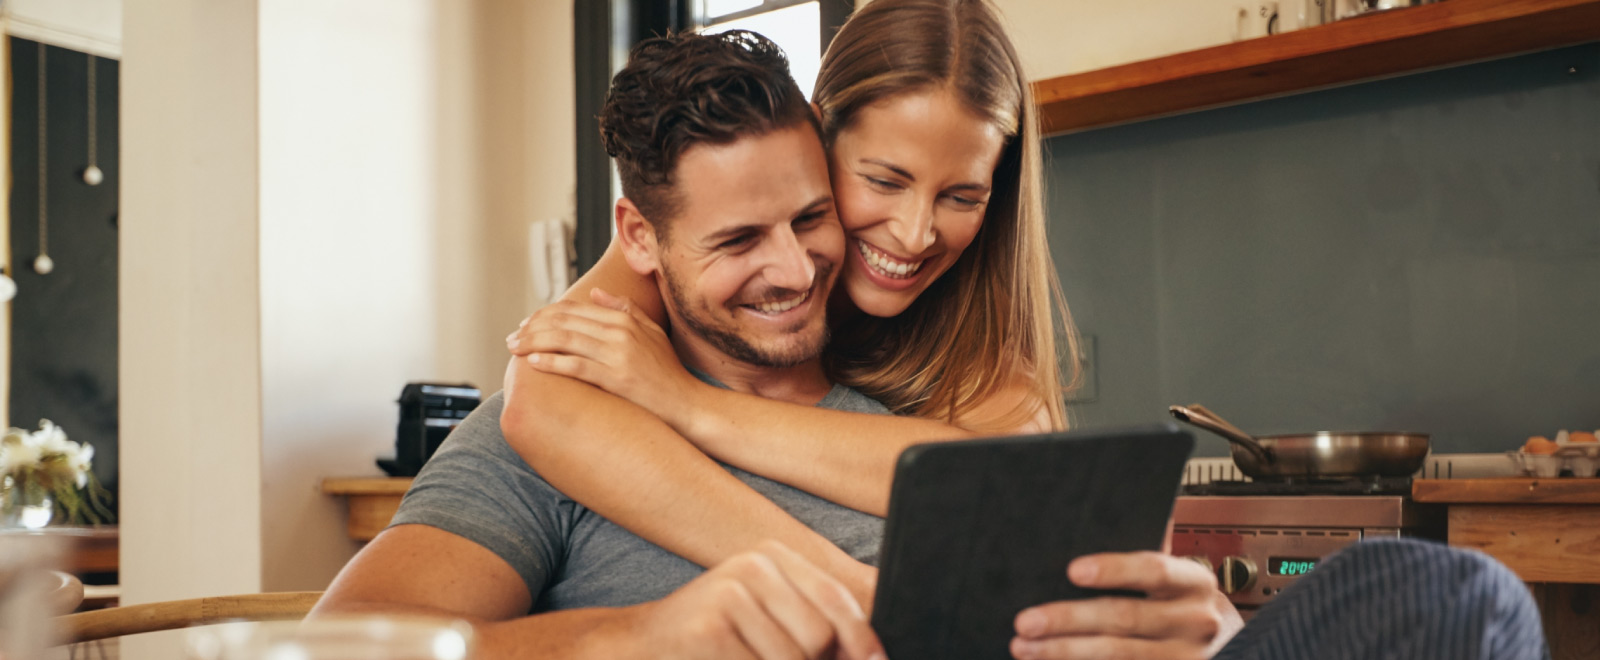 A man holding a tablet smiling with a woman hugging him from behind and looking at the tablet.